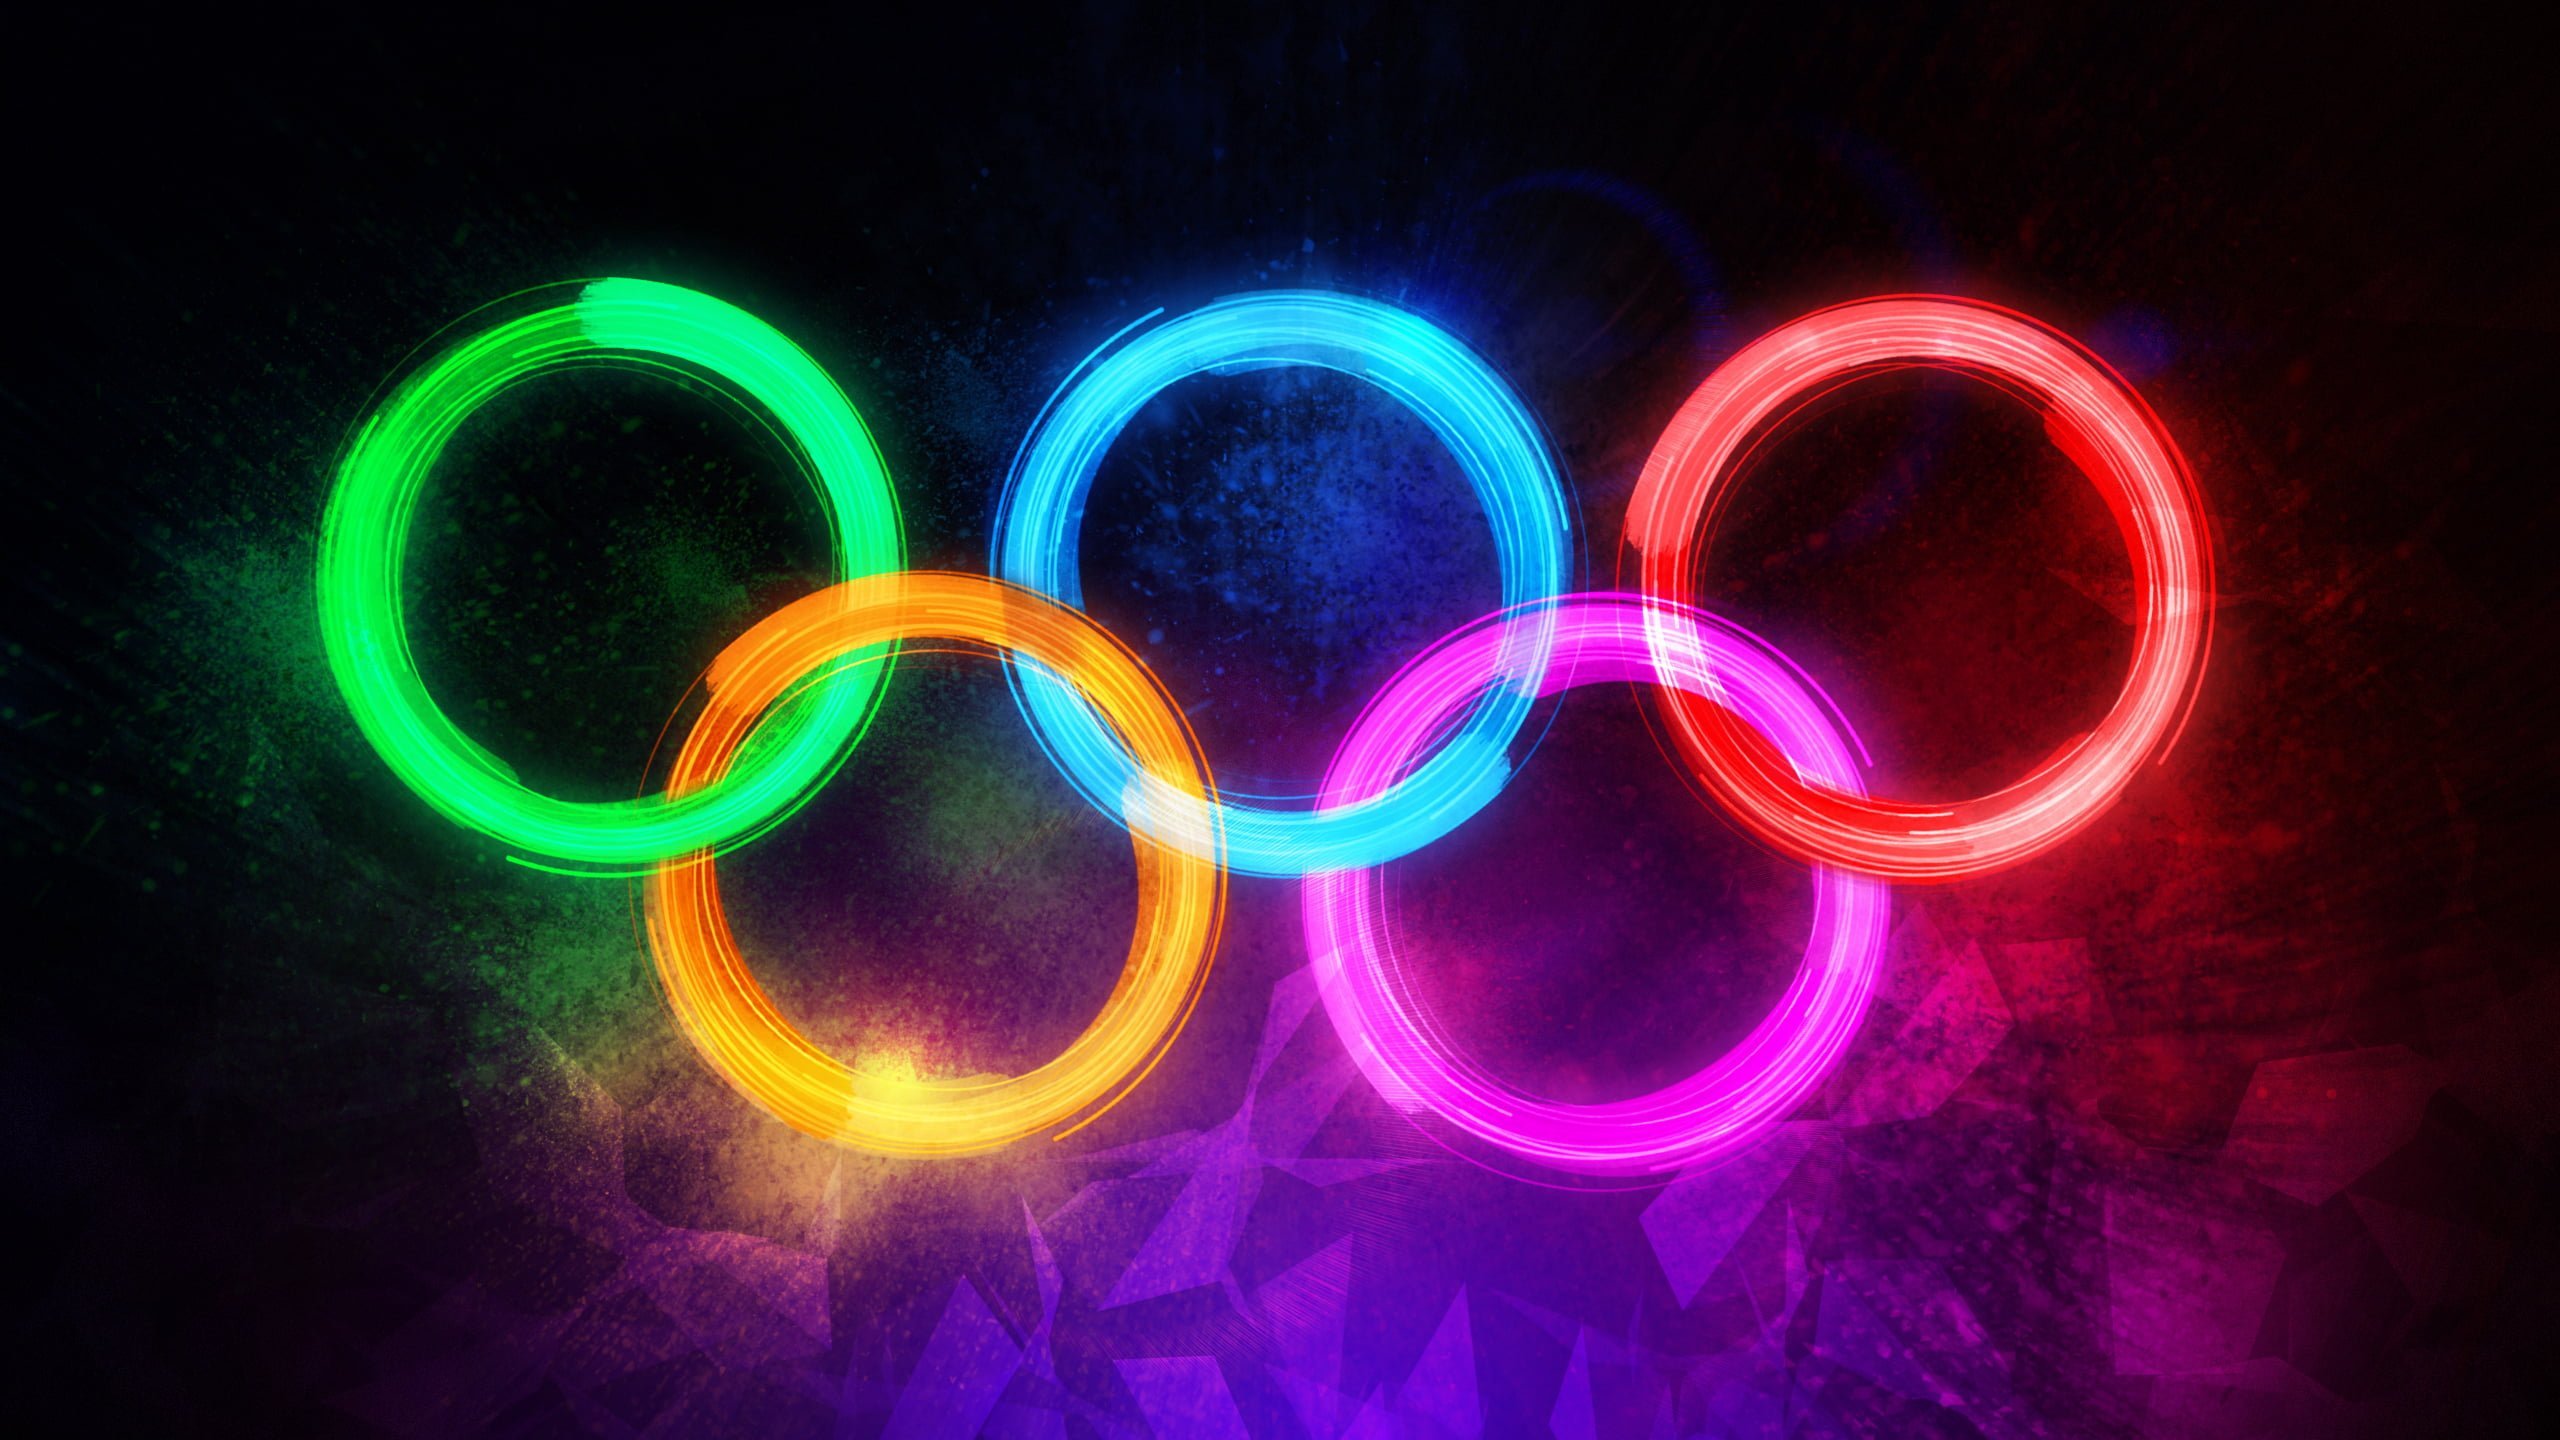 Free download Olympics logo illustration olympic bright colourfull circle HD [2560x1440] for your Desktop, Mobile & Tablet. Explore Olympics Wallpaper. Olympics Wallpaper, Winter Olympics Wallpaper, 2020 Summer Olympics Wallpaper